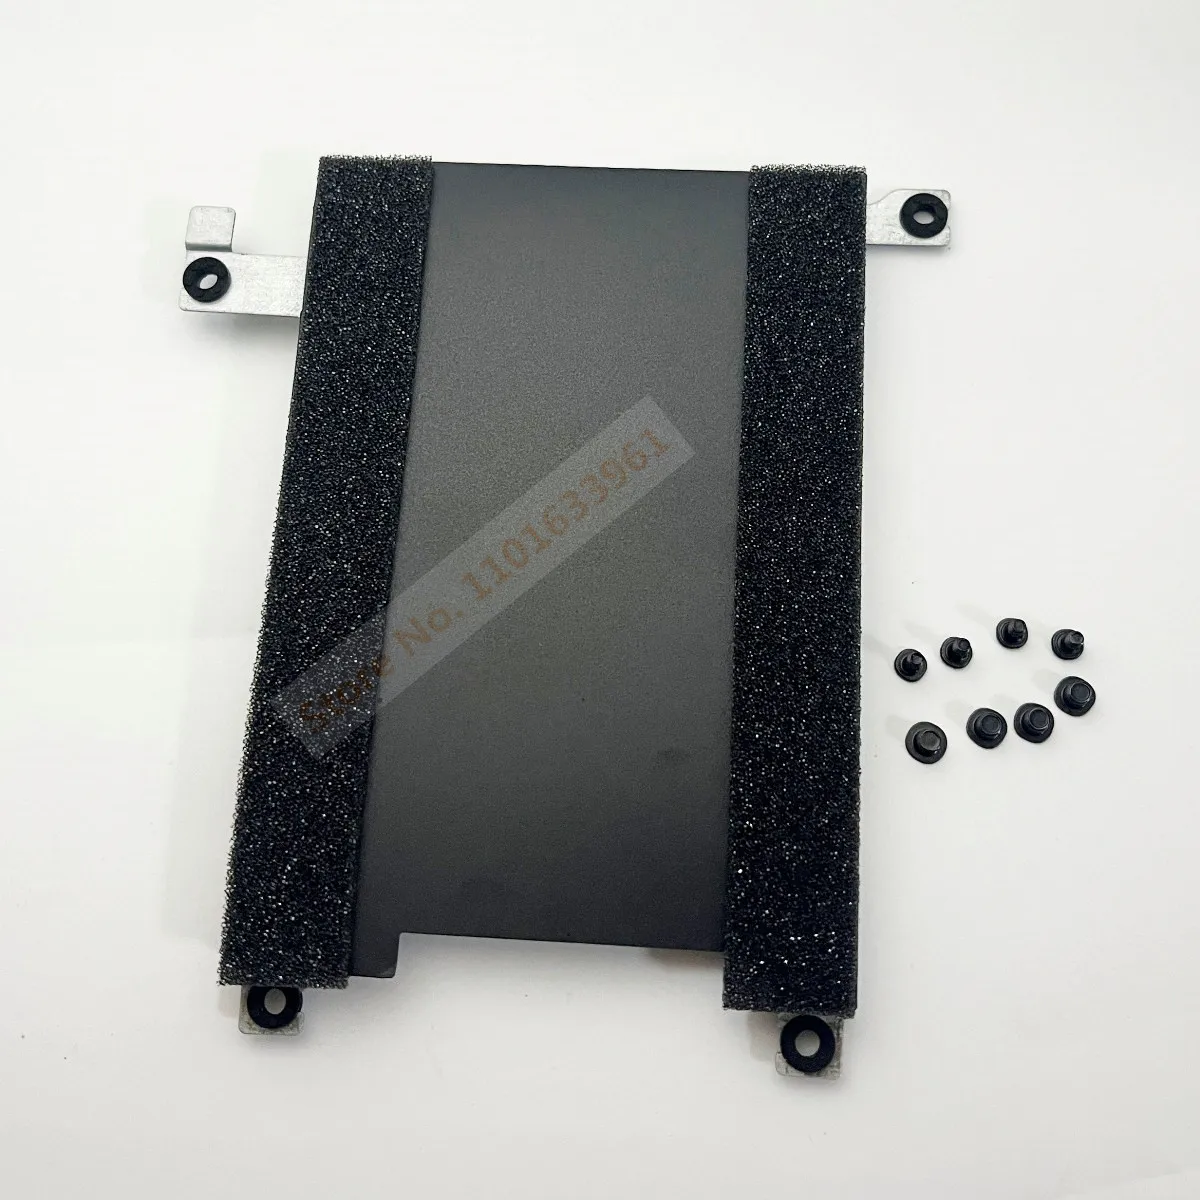 

2.5 Inch HDD SSD SATA Hard Disk Drive Caddy Frame Tray Bracket Cable for Dell Precision 3540 3541 3542 3550 3551 ND8N9 XY5F7